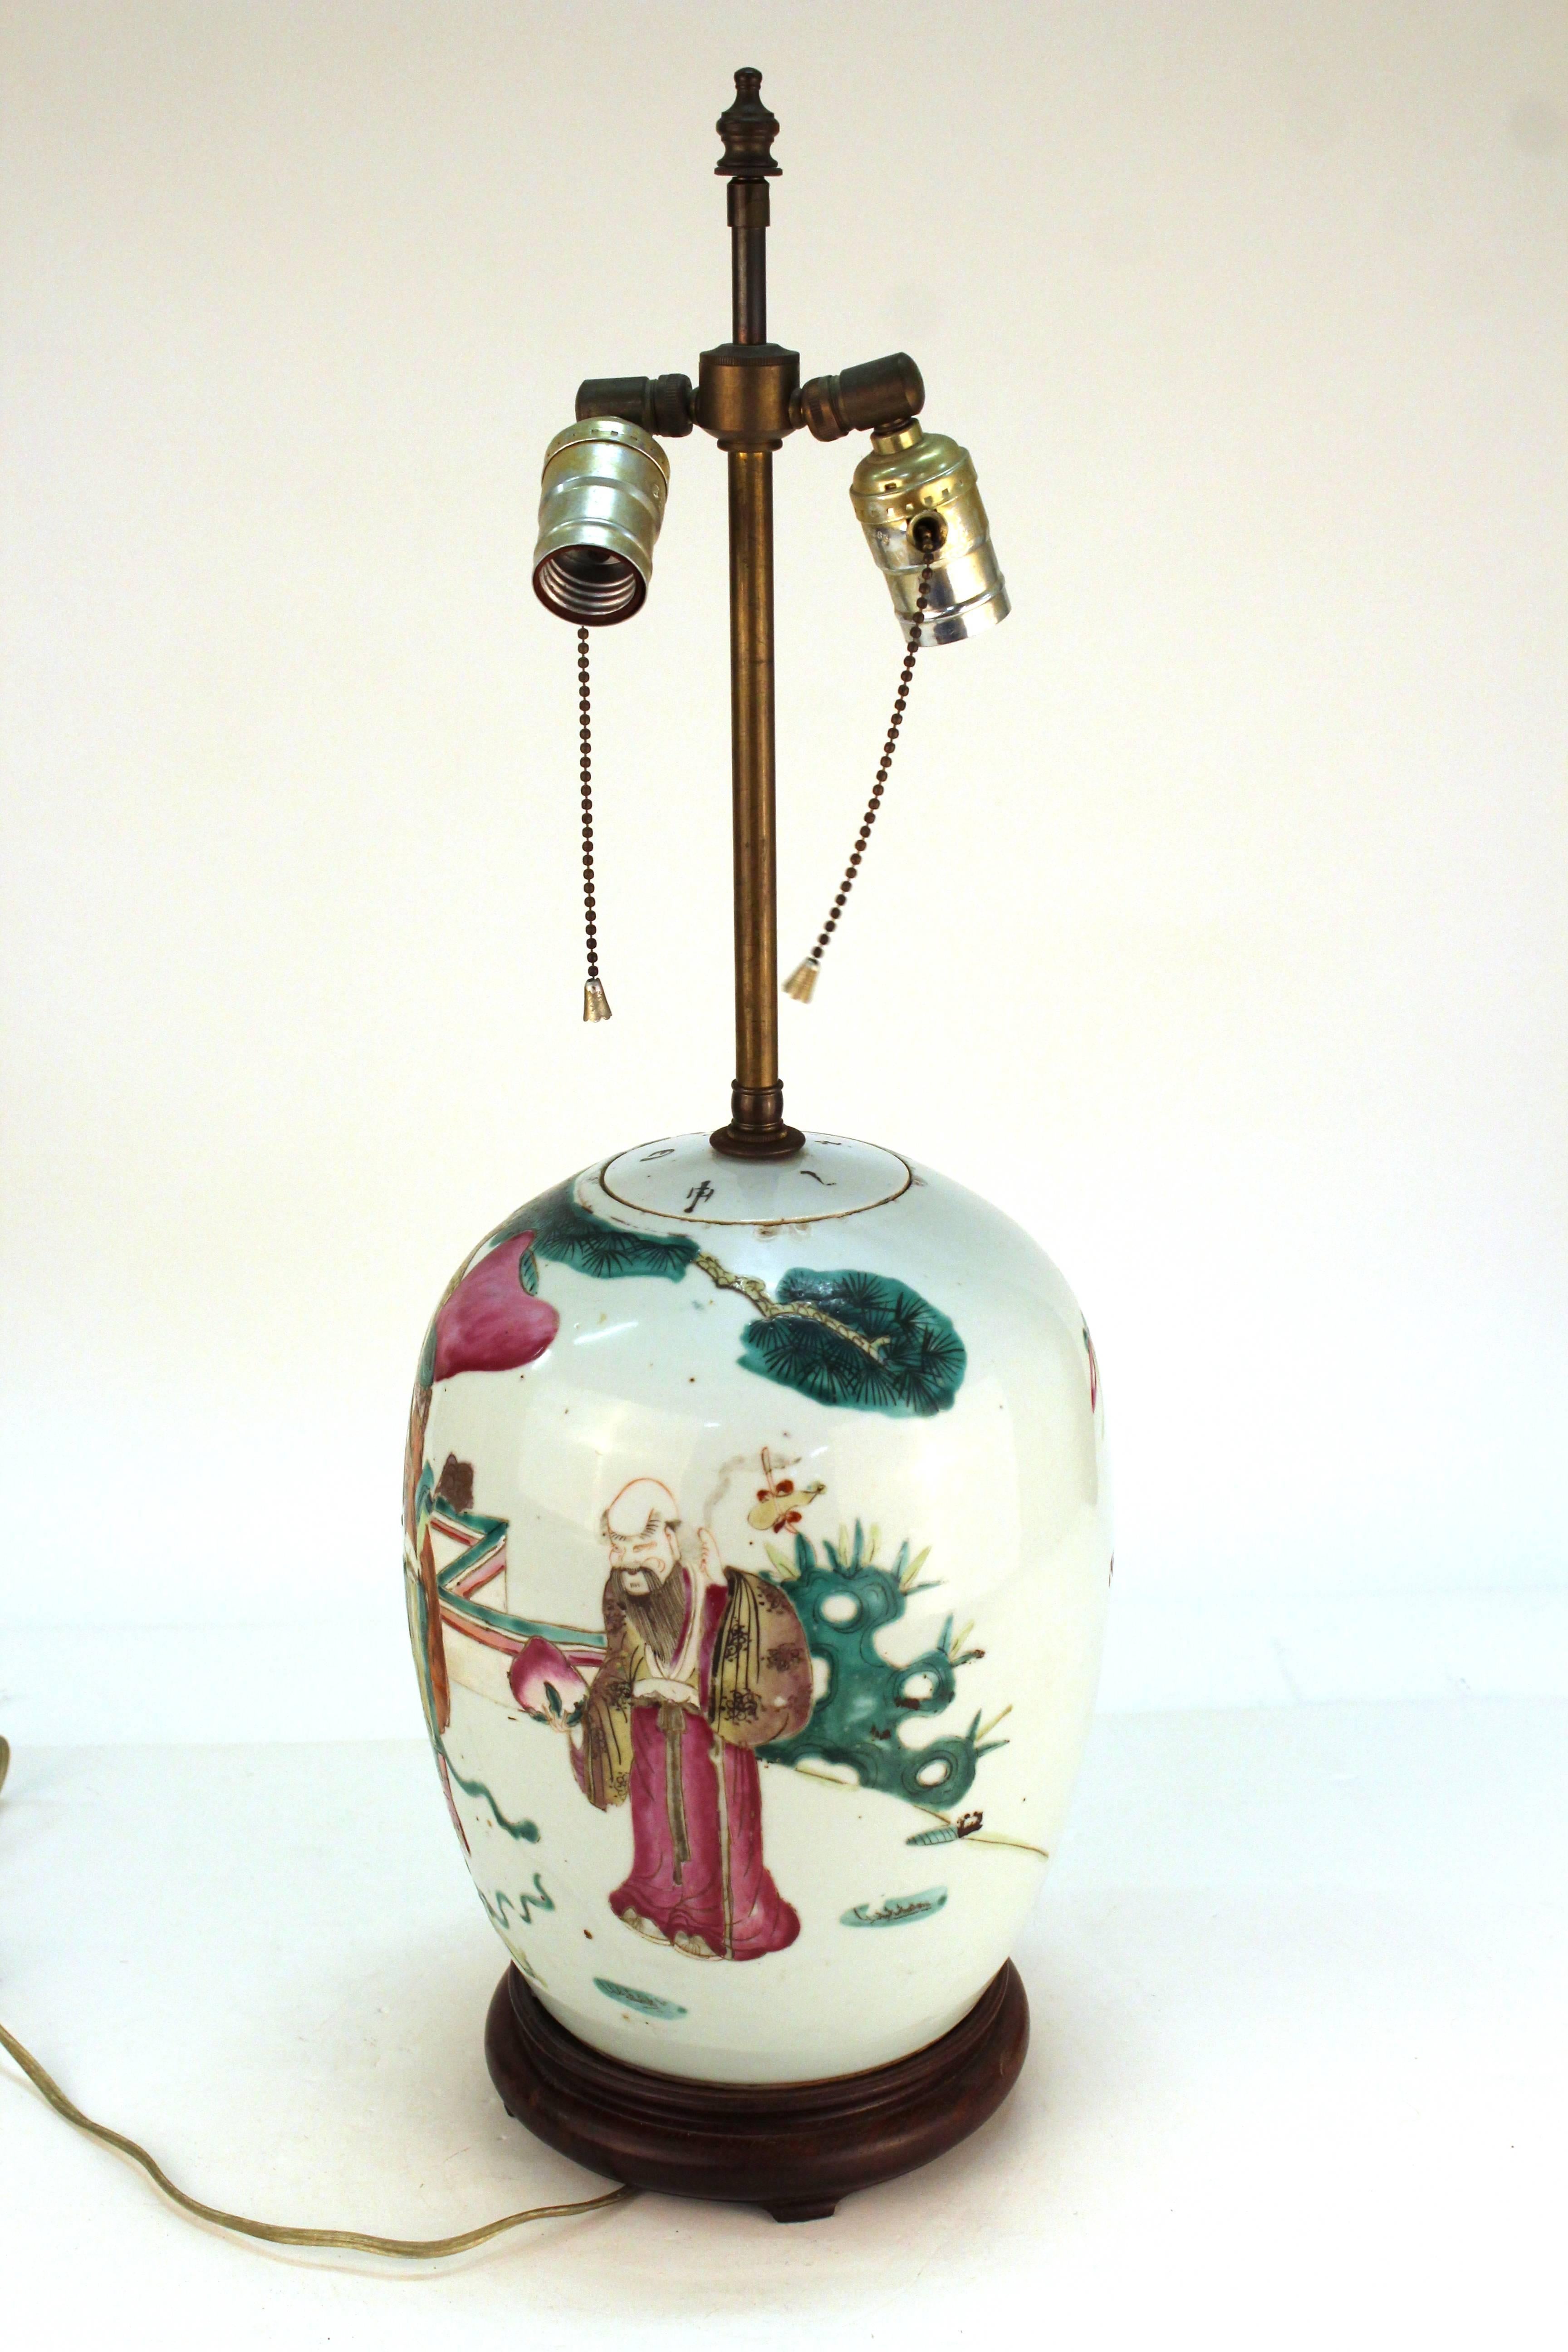 A Chinese porcelain jar of the Famille Rose, modified to function as a table lamp. The piece is in good vintage condition with age-appropriate wear.